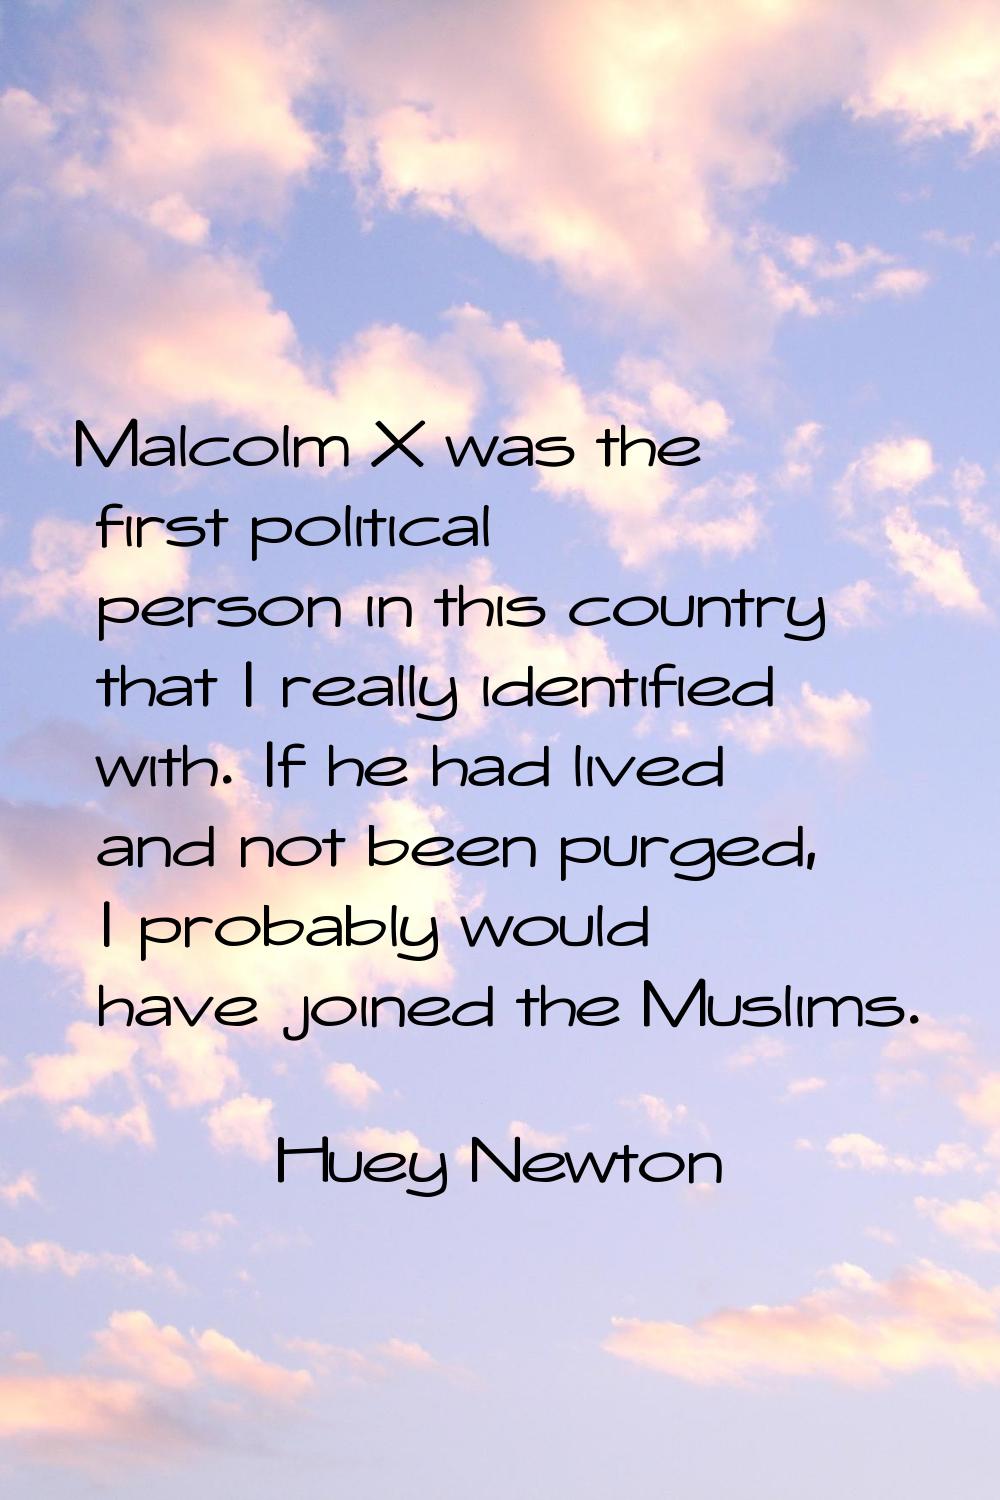 Malcolm X was the first political person in this country that I really identified with. If he had l